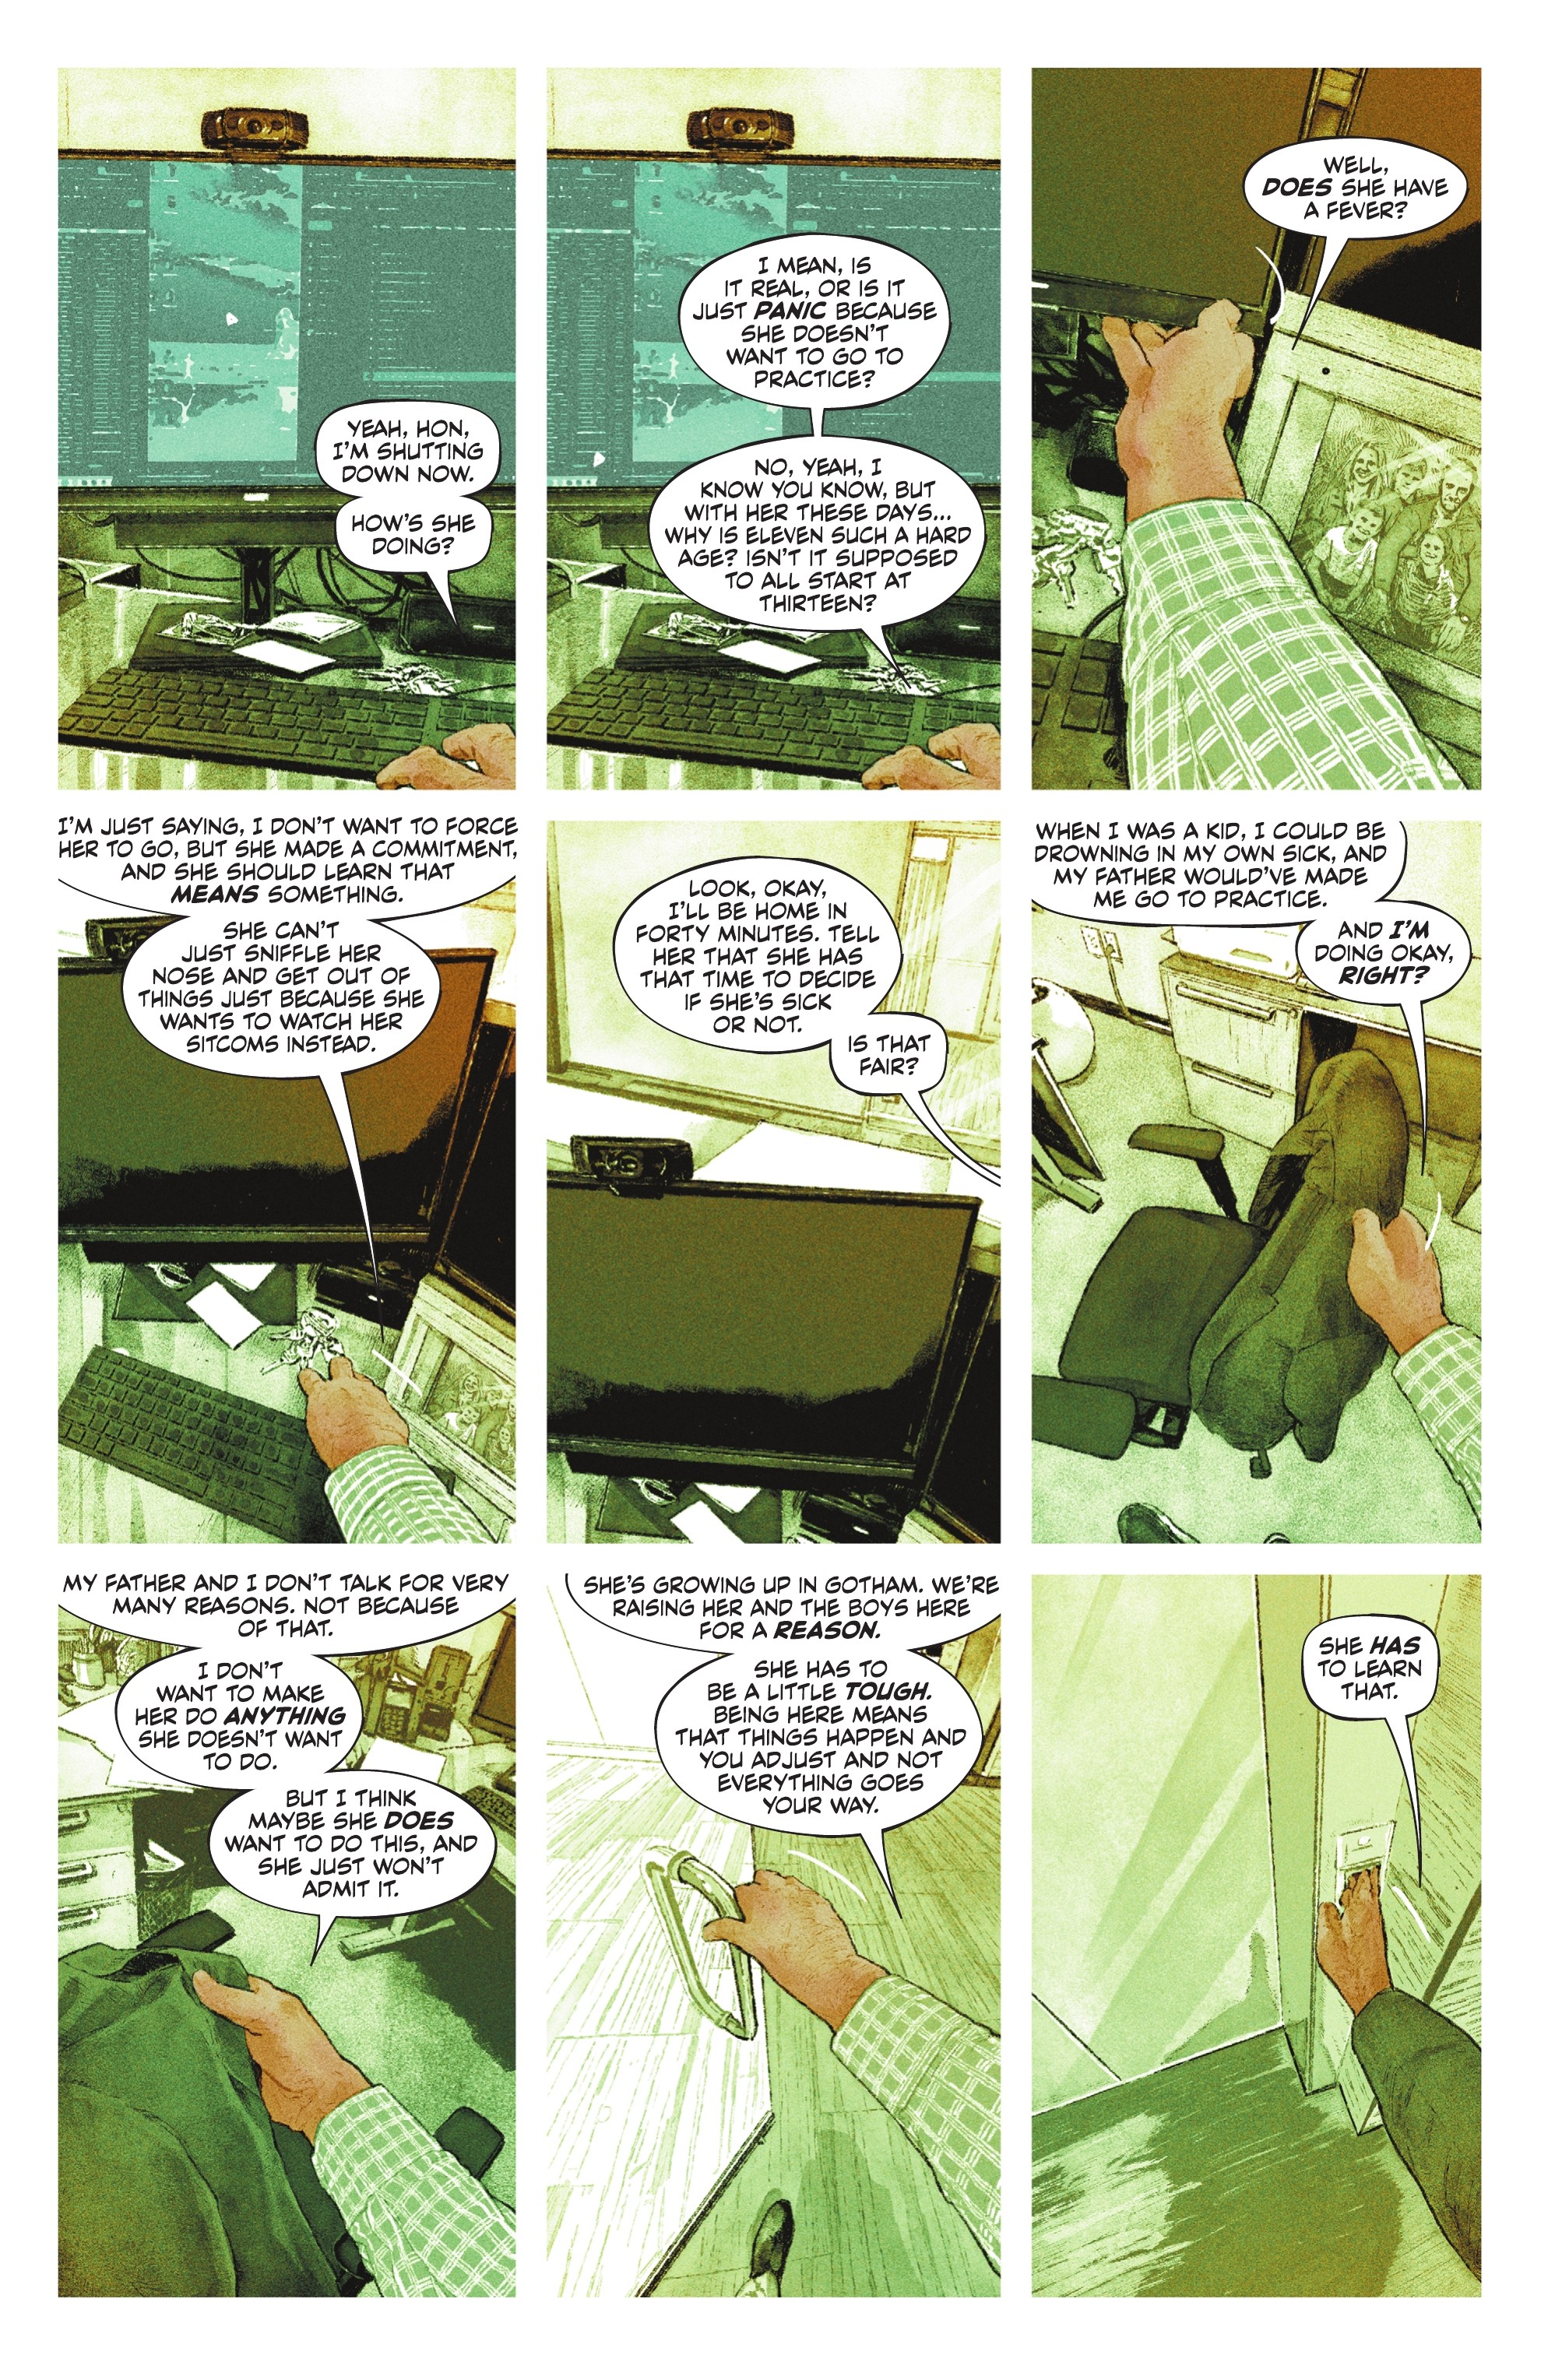 Batman: One Bad Day - The Riddler (2022-): Chapter 1 - Page 3